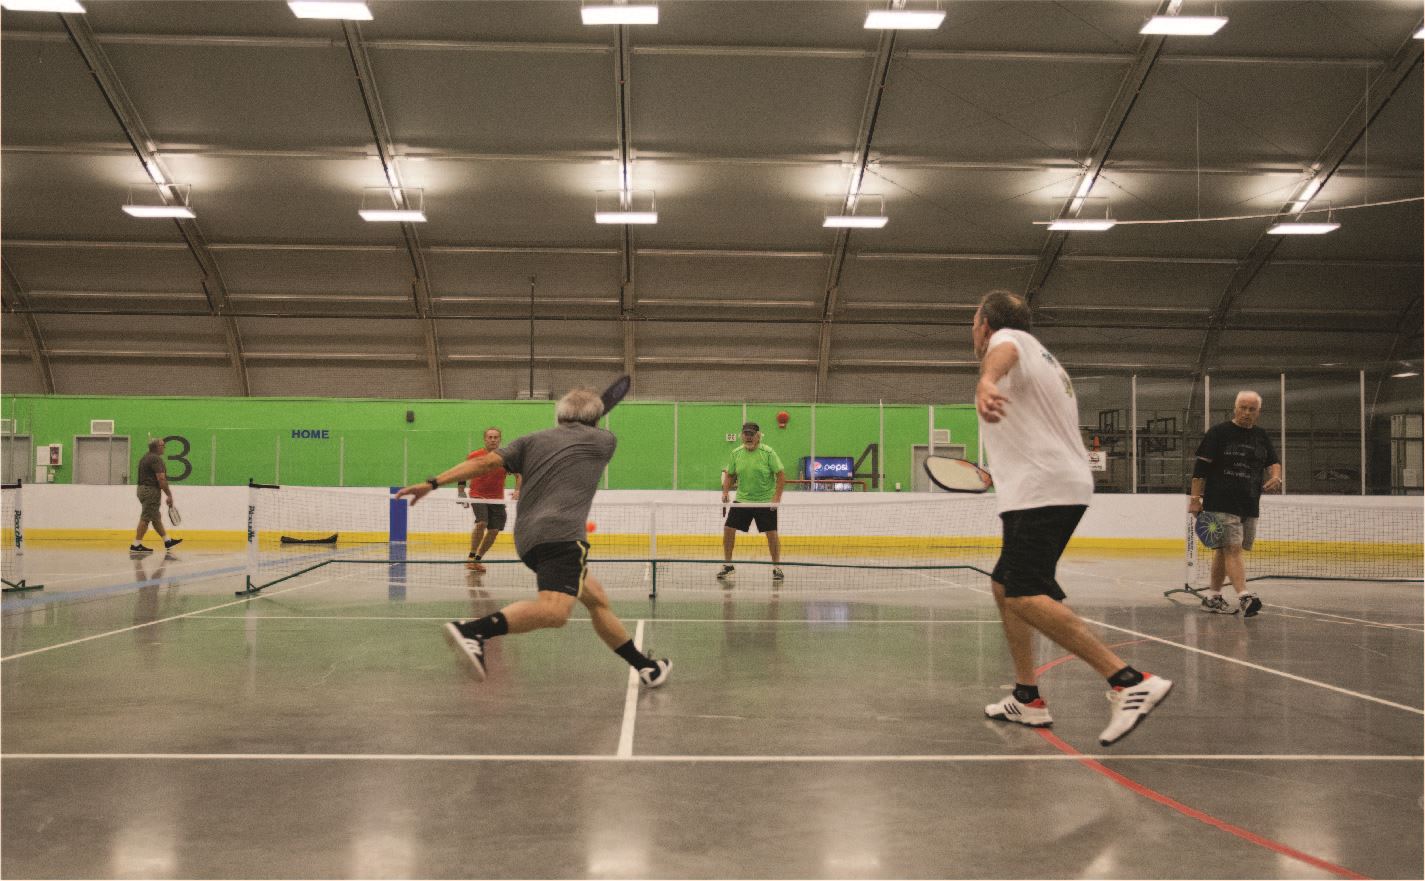 A group of adults play pickleball at an indoor court